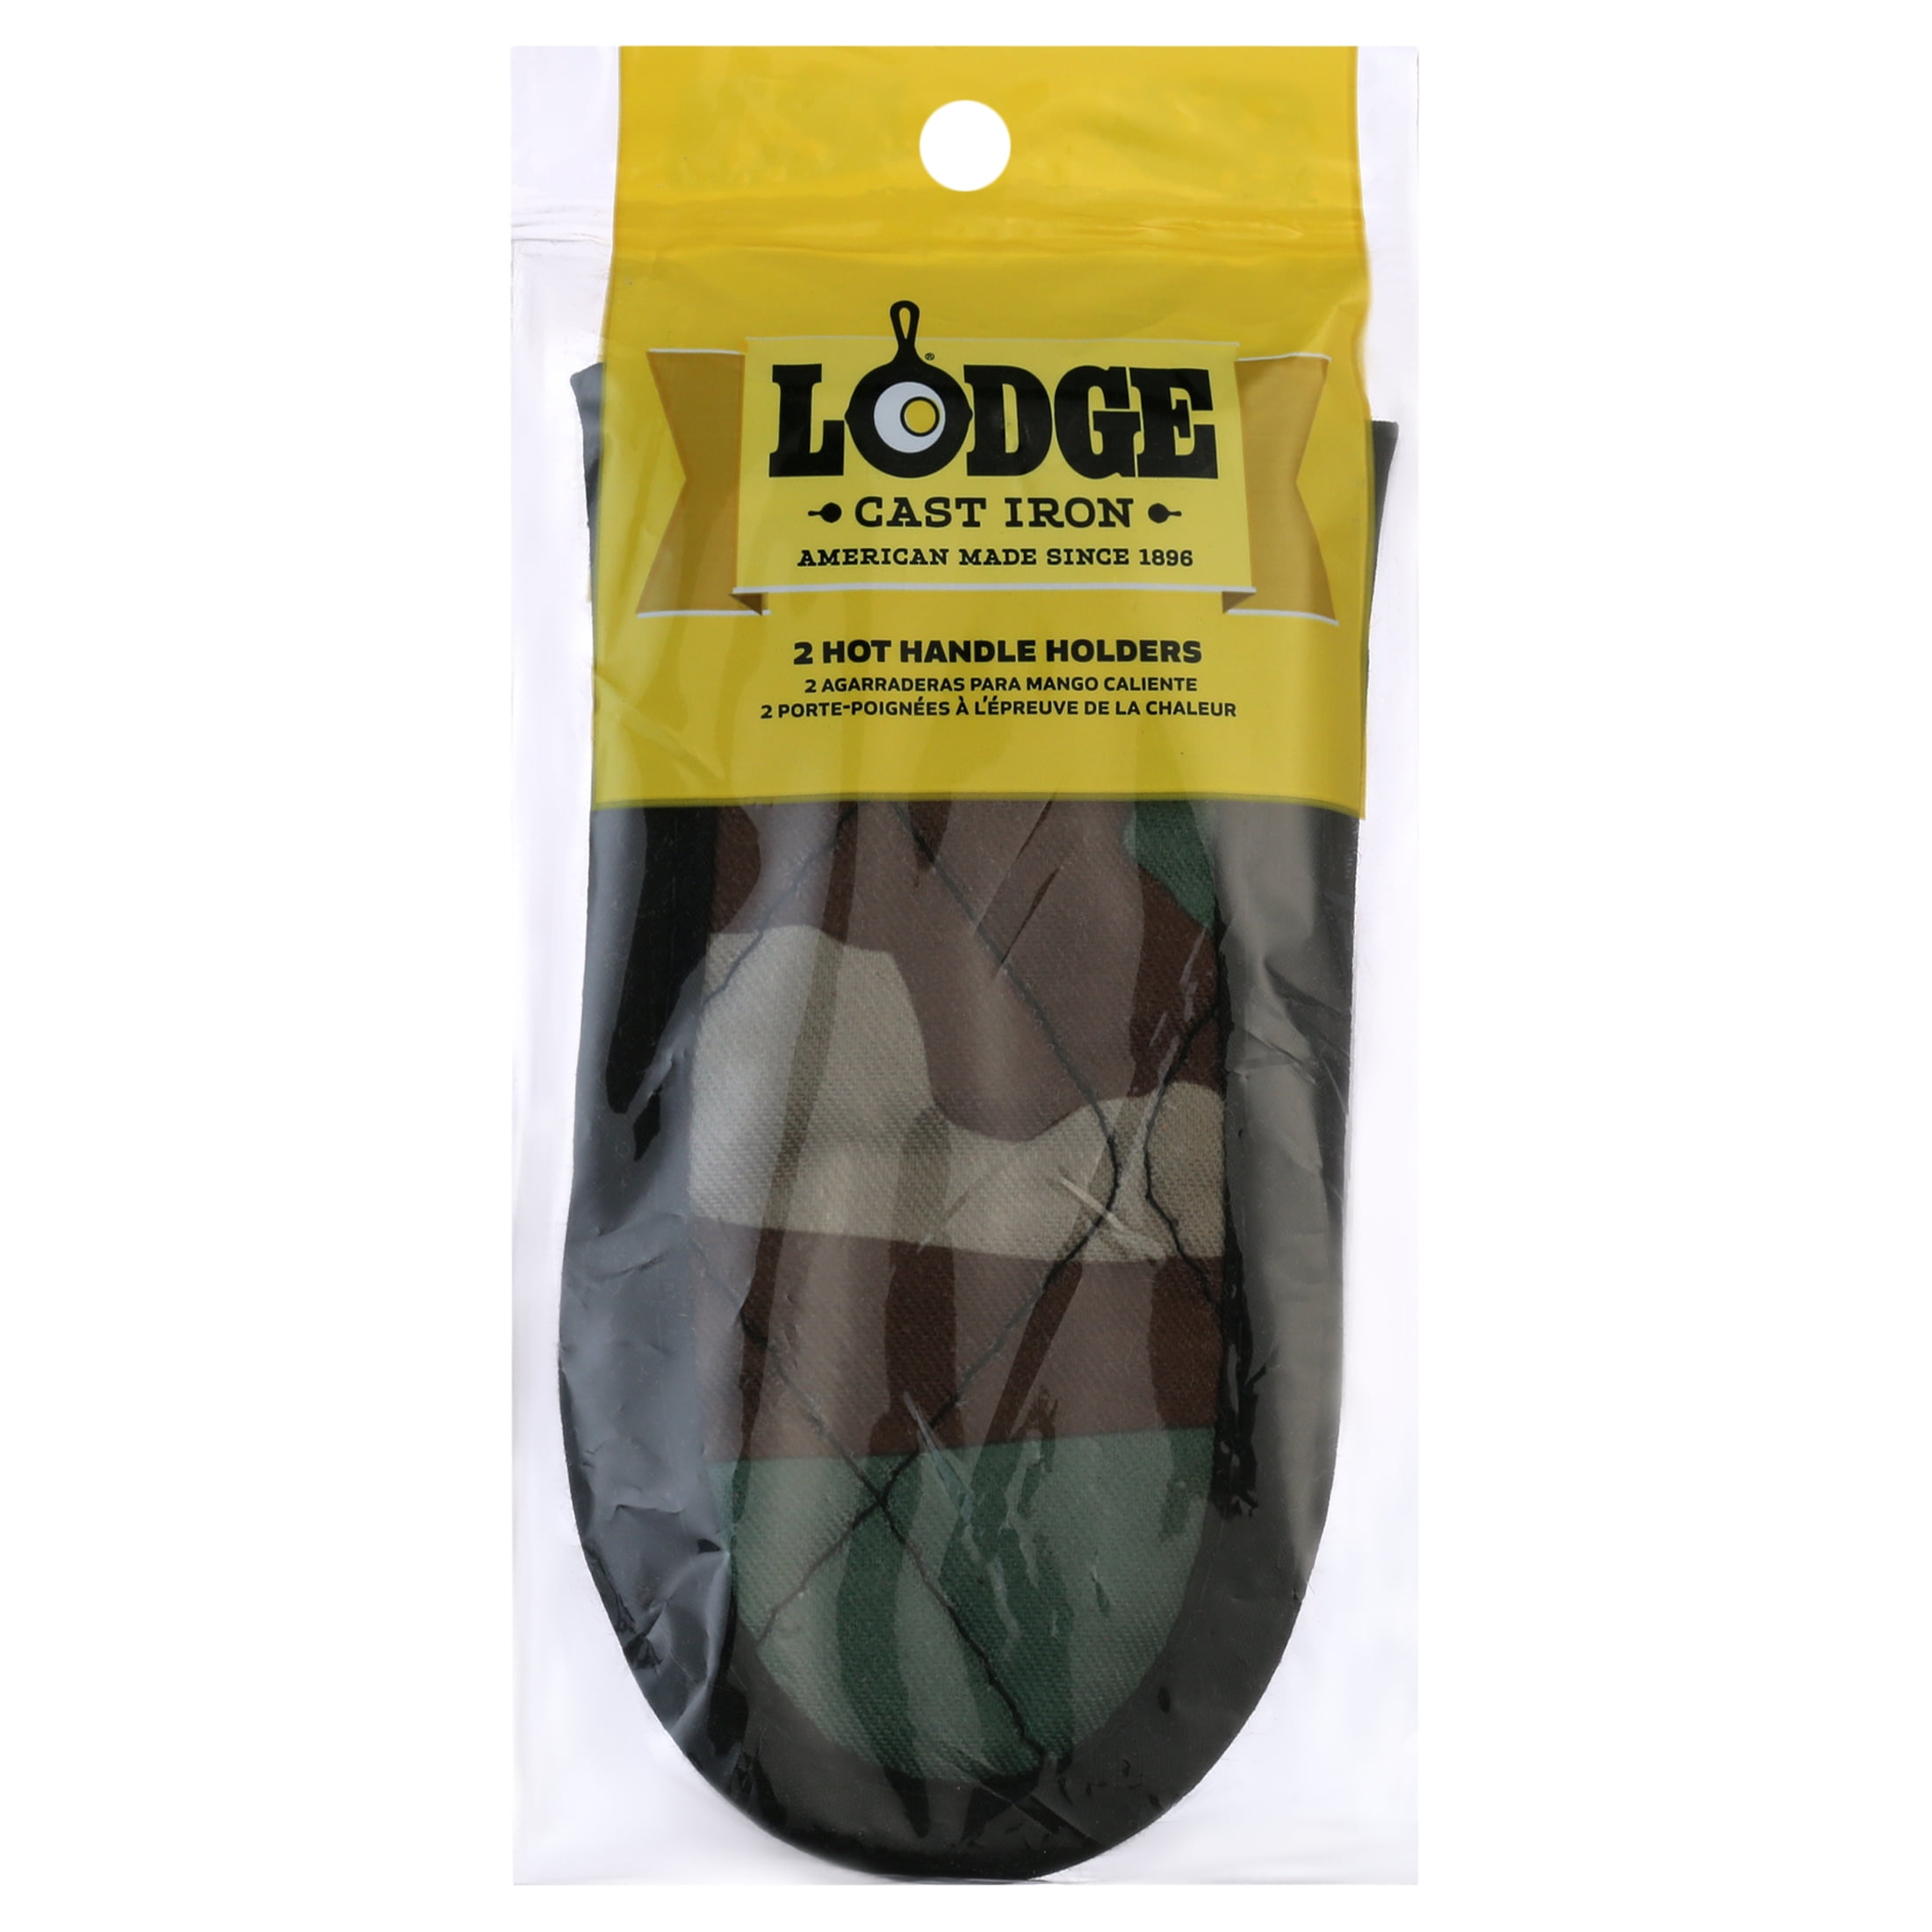 Lodge Fabric Hot Handle Holders 2 Pack by World Market